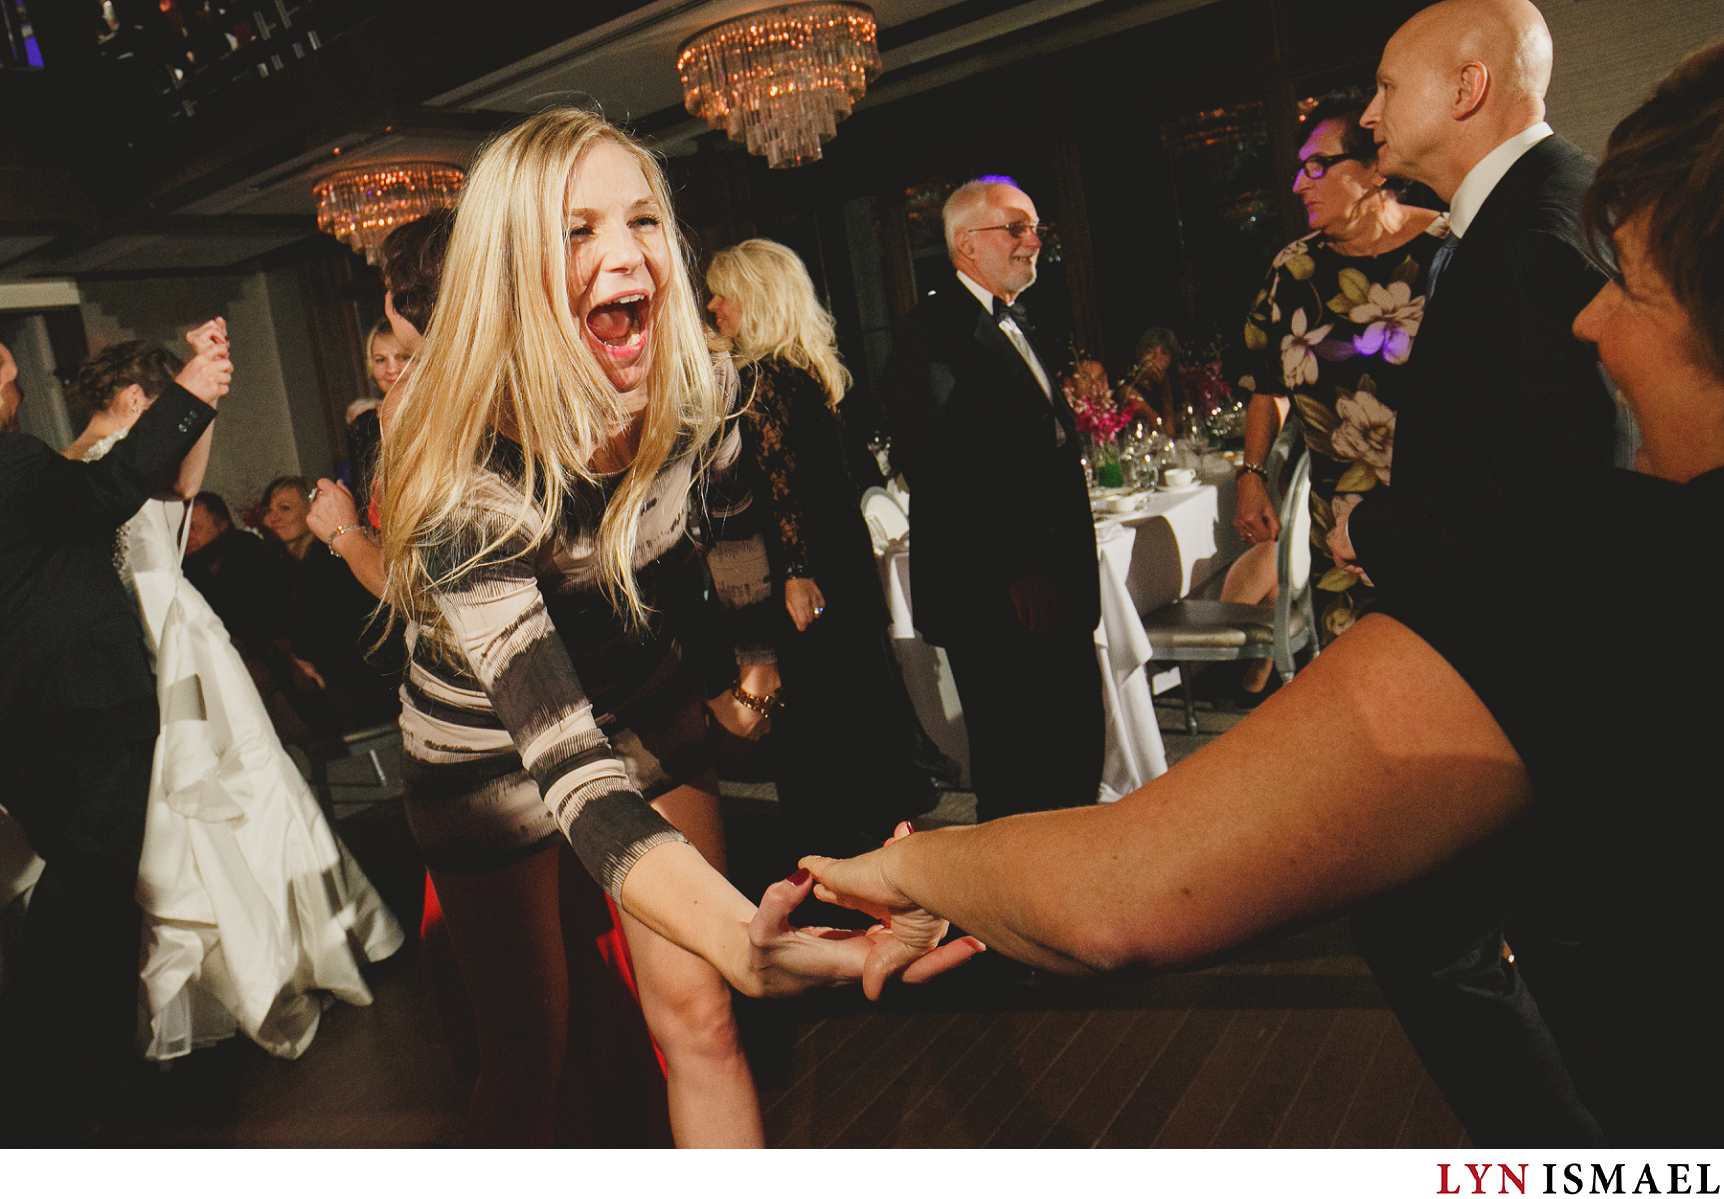 Moment driven wedding photographer captures guests at the Grandview Room of Whistle Bear Golf Club happily dancing.